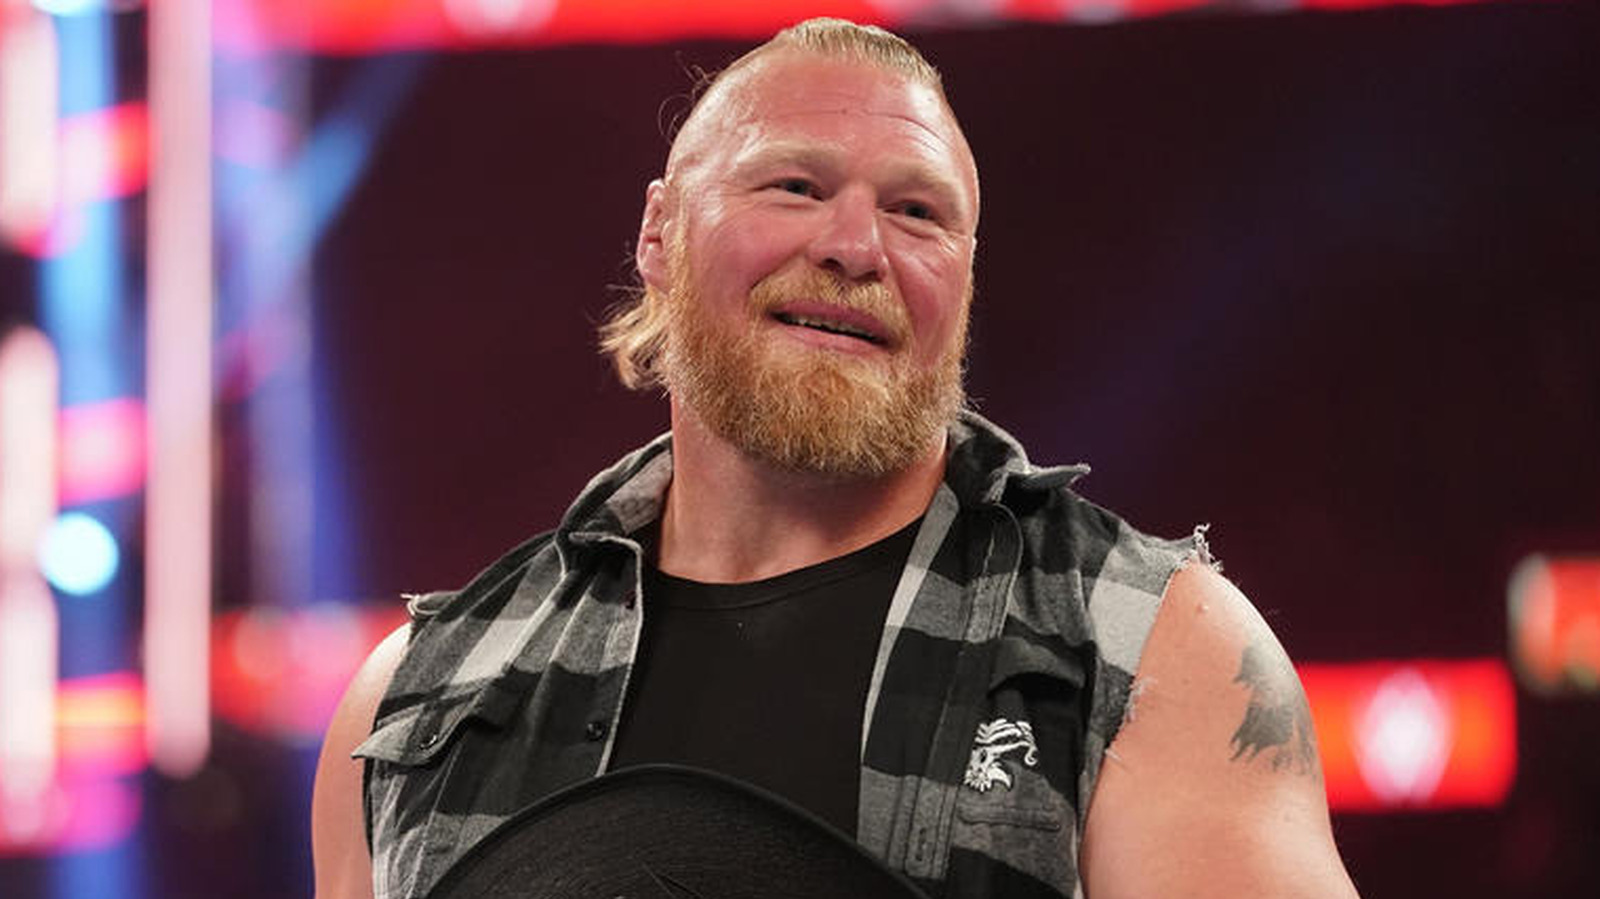 WWE Star GUNTHER Comments On Whether He'd Still Be Open To A Match With Brock Lesnar